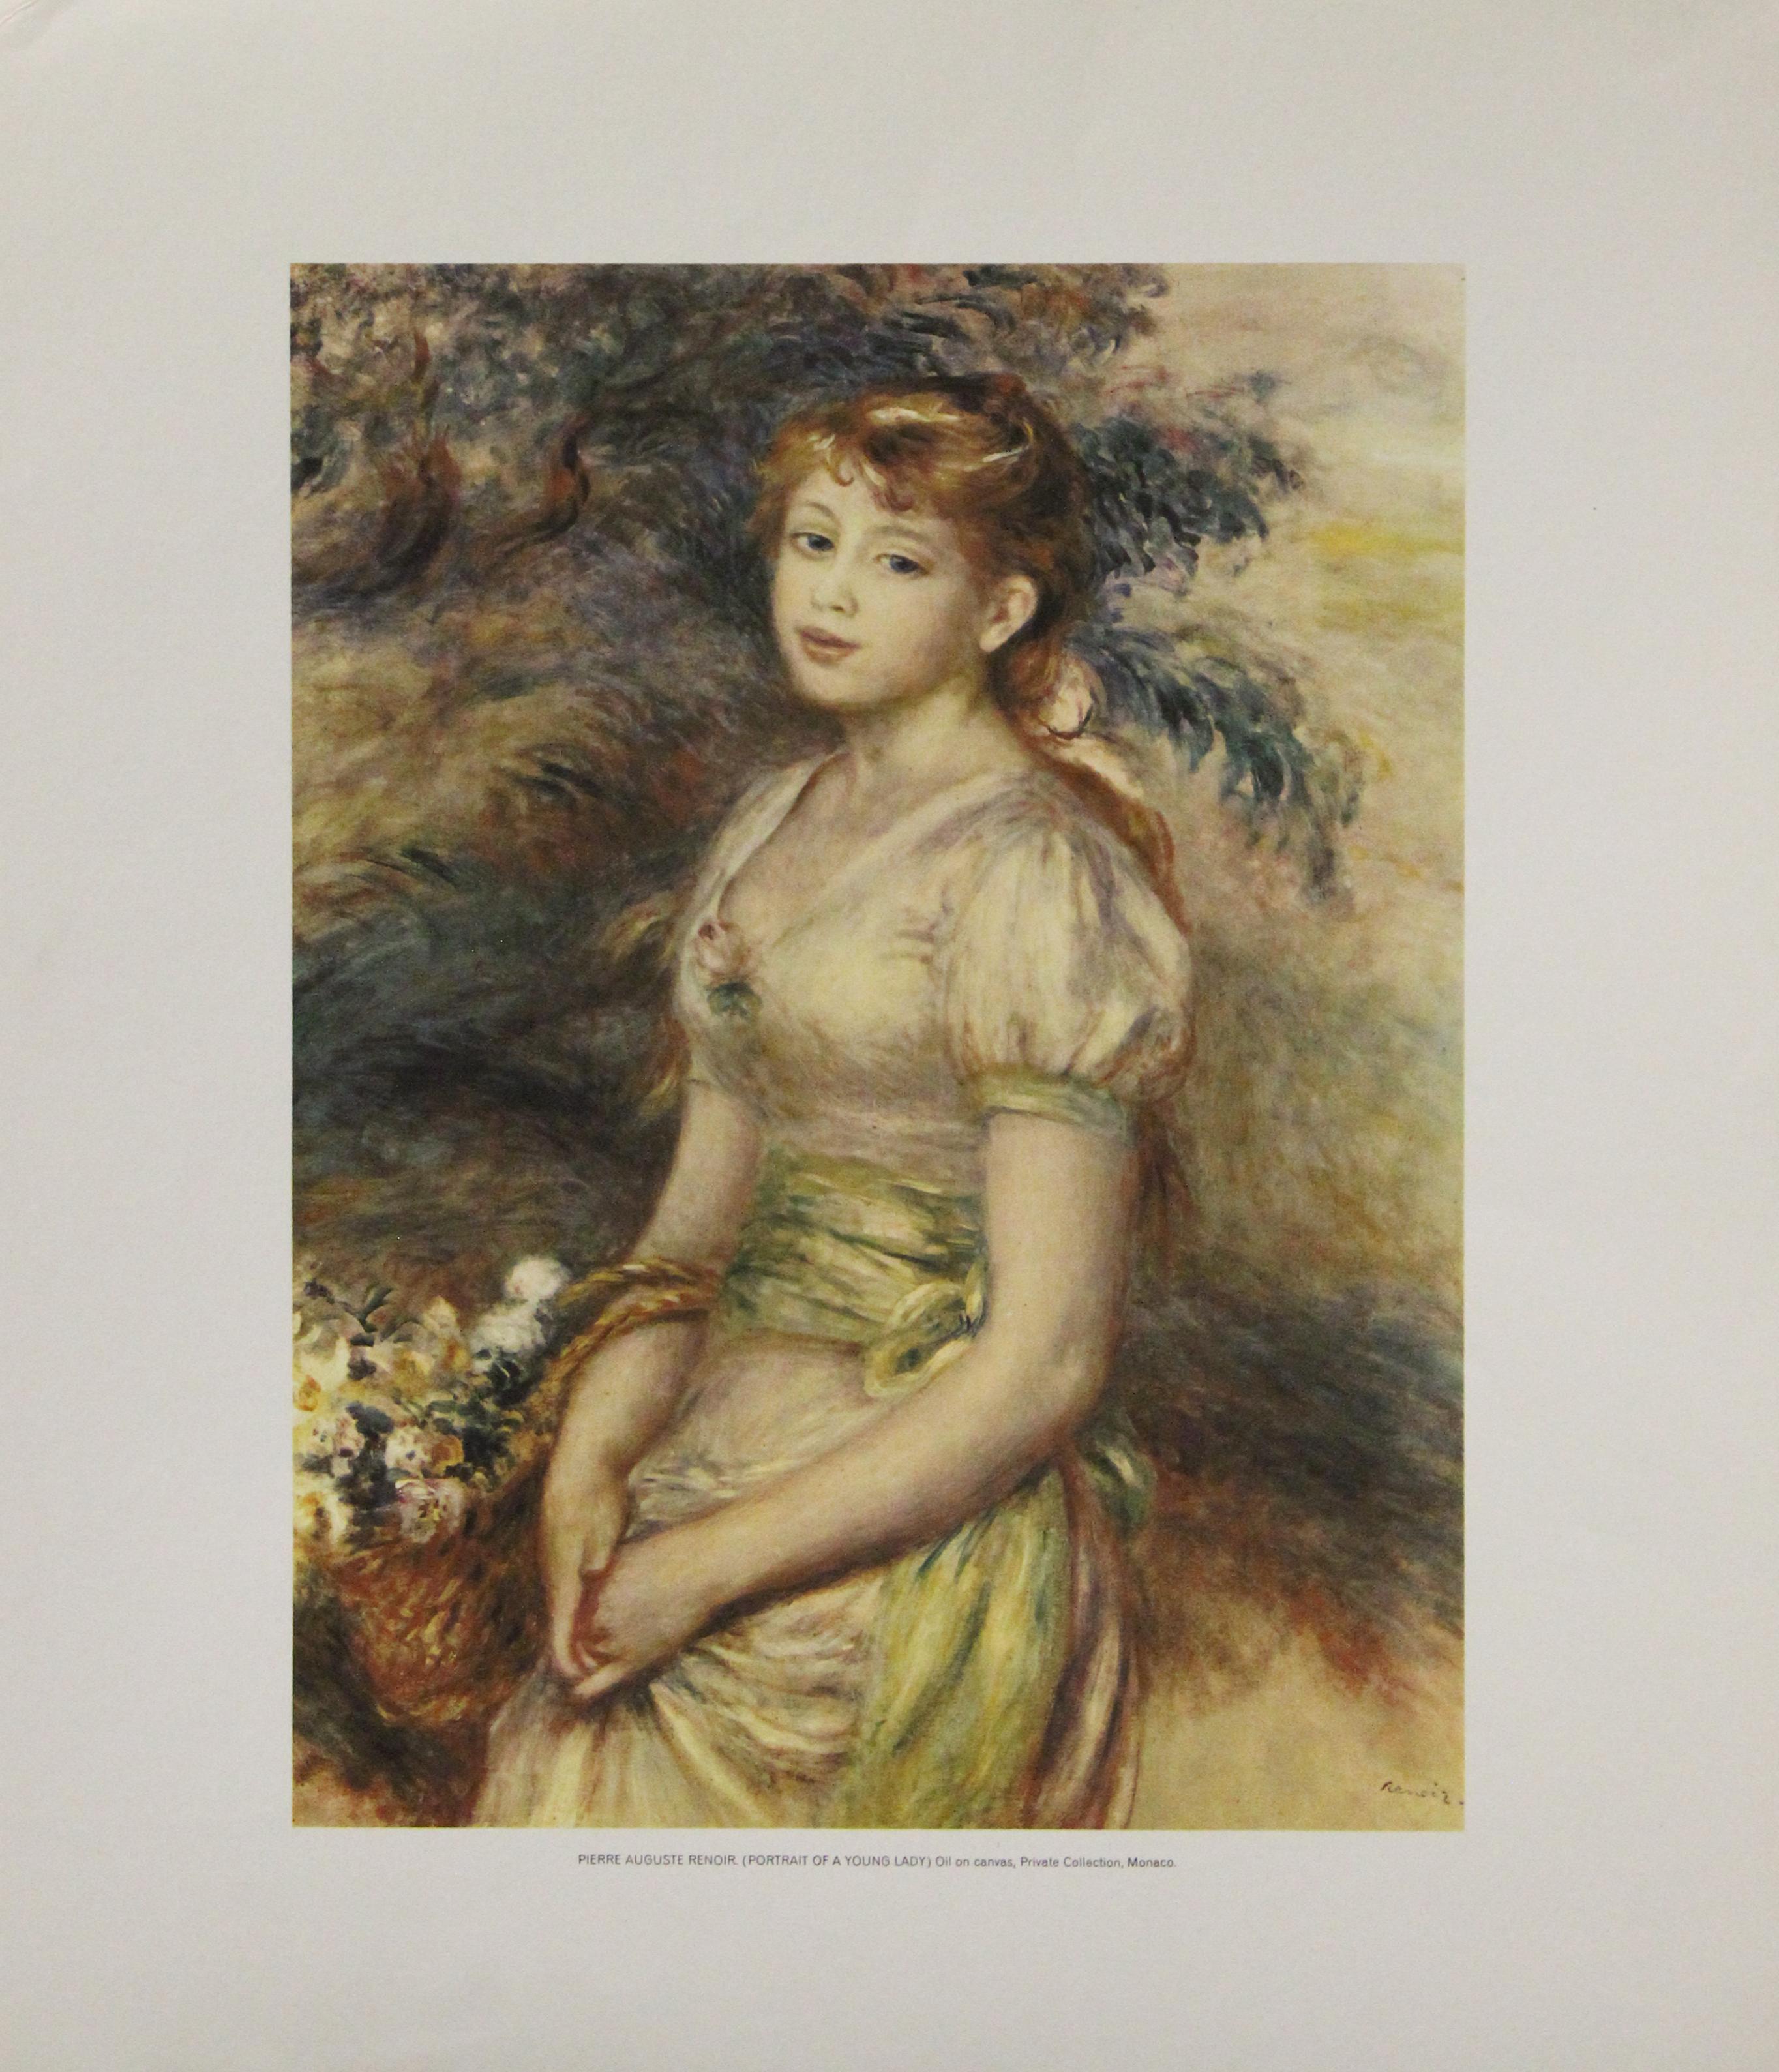 Pierre Auguste Renoir Portrait Print - Portrait of a Young Lady-Poster. Printed in Spain. 